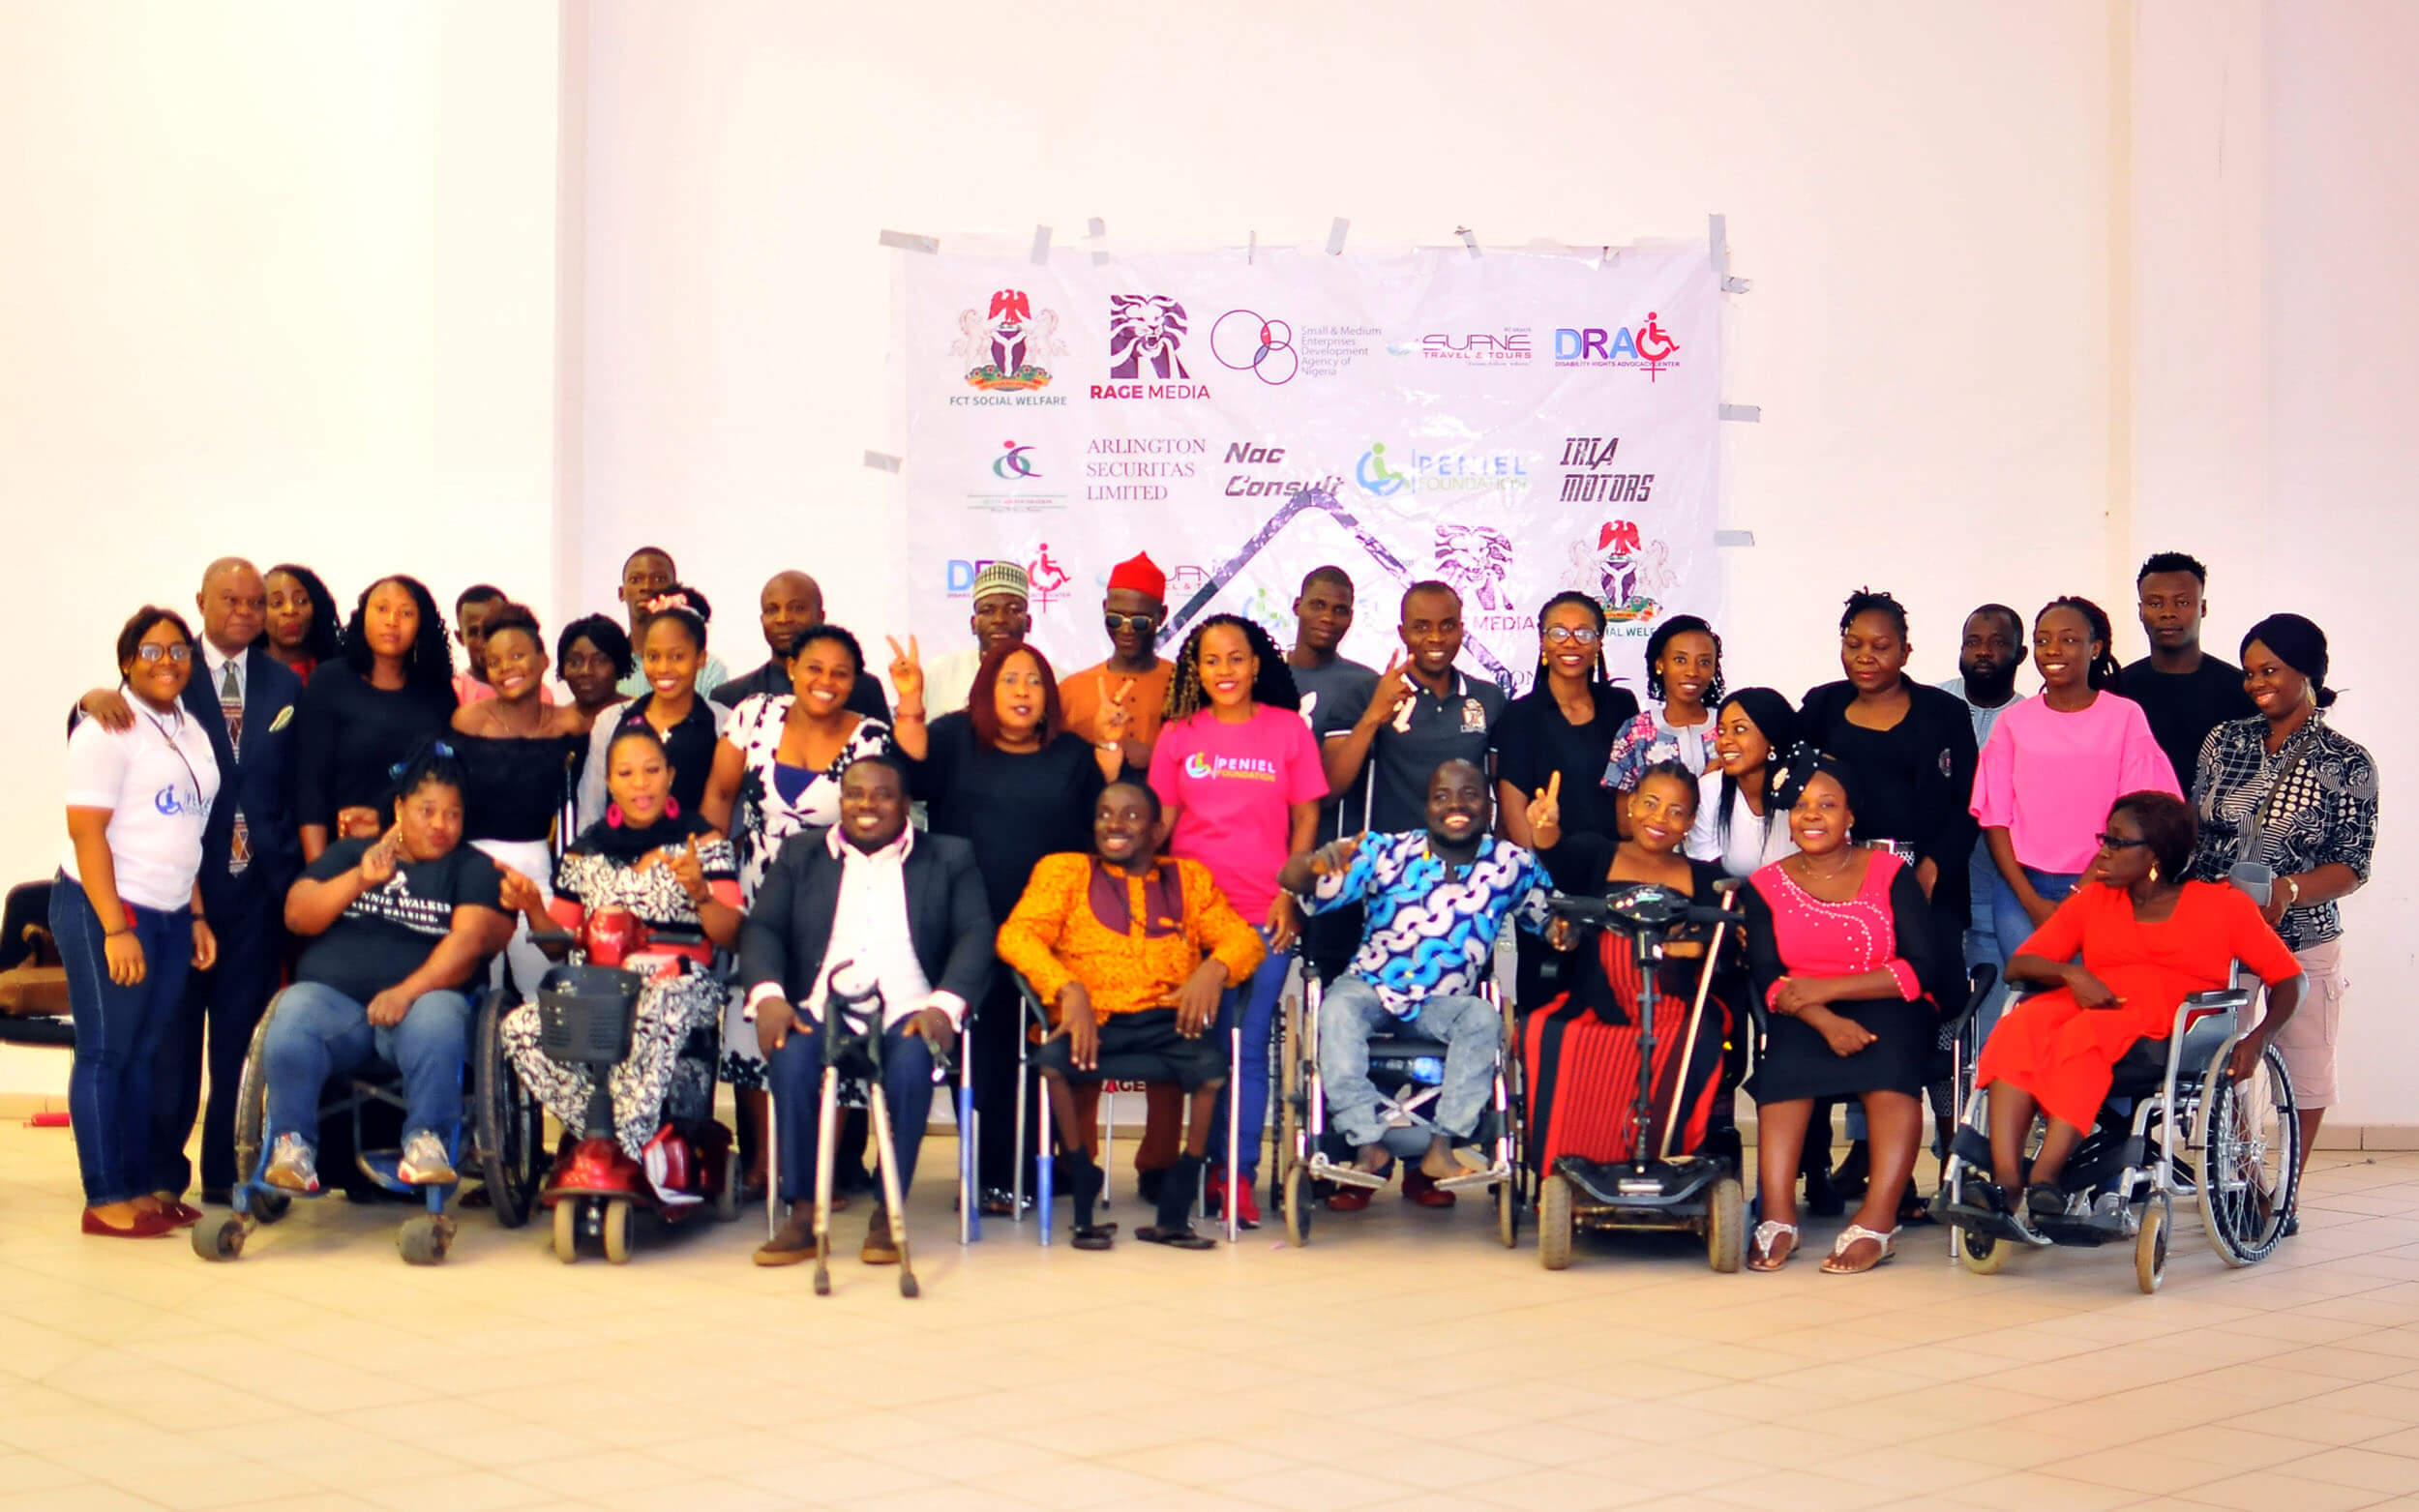 Peniel Foundation Group Photo with Peniel Foundation Day Attendees & Speakers